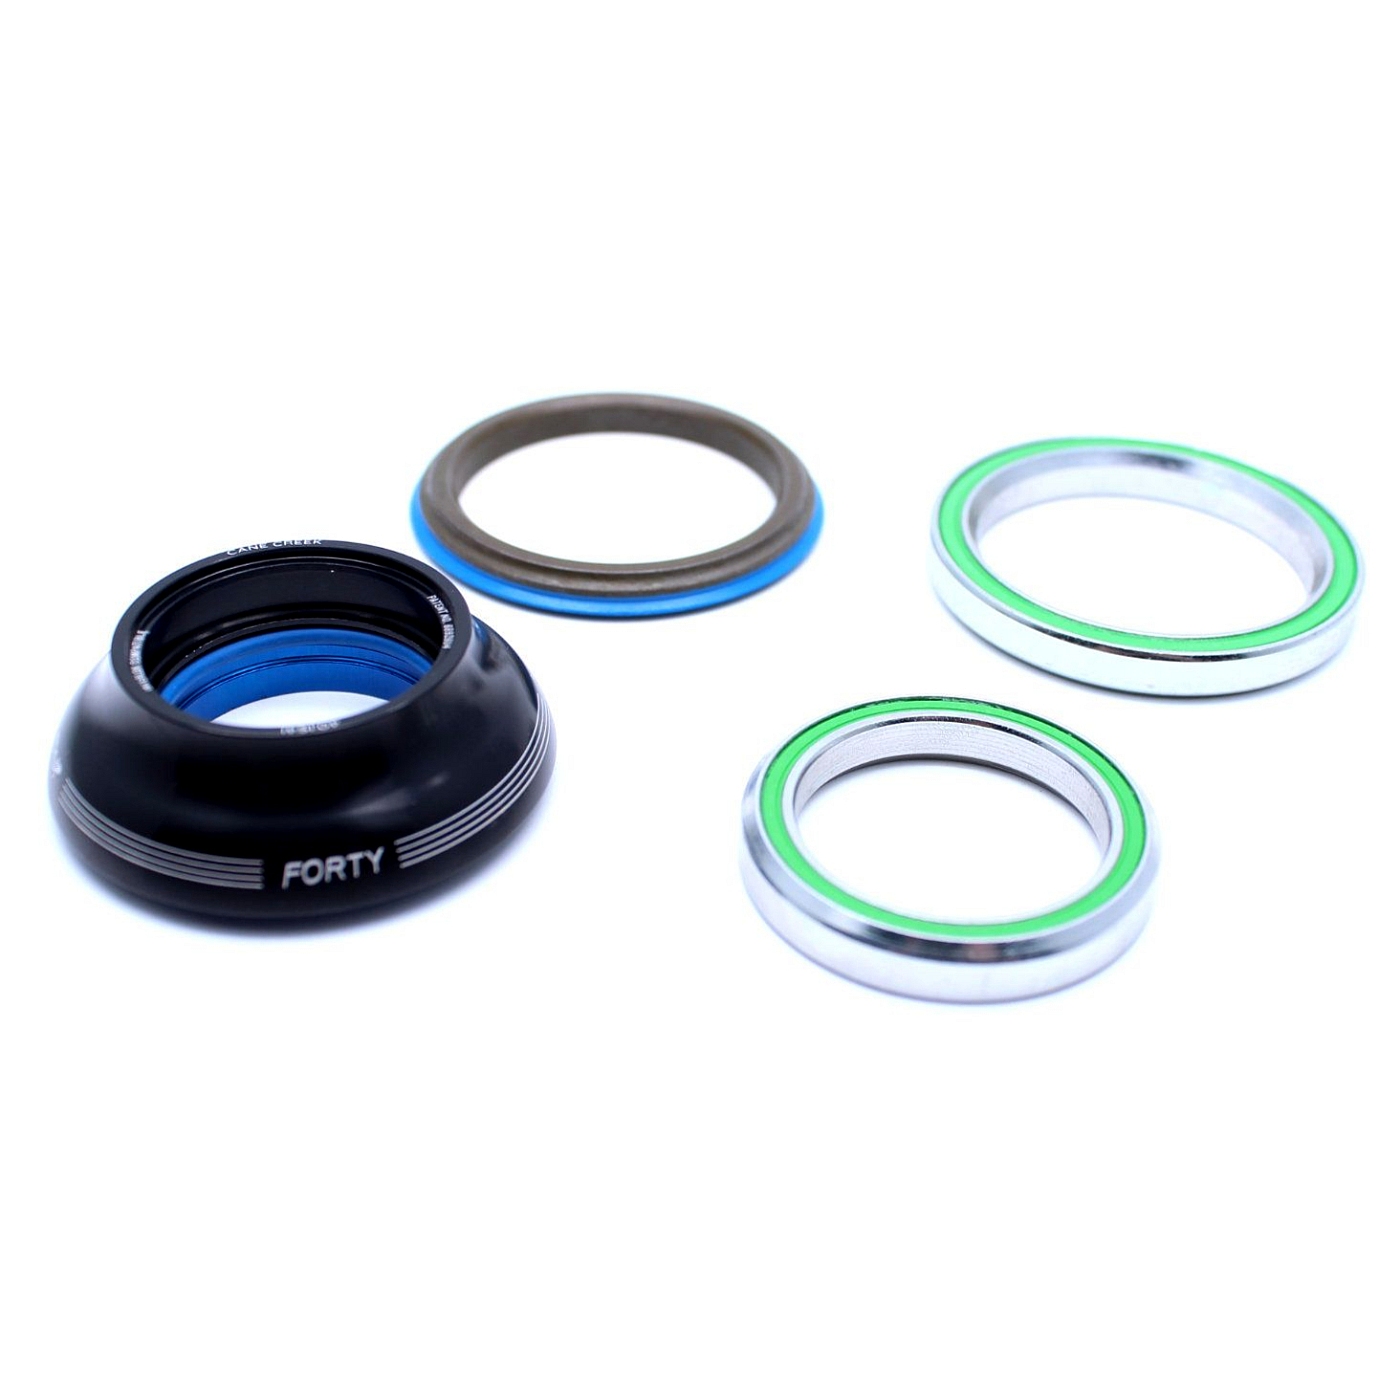 Picture of Yeti Cycles Cane Creek Integrated Custom Headset - 12mm Tapered for SB150/165